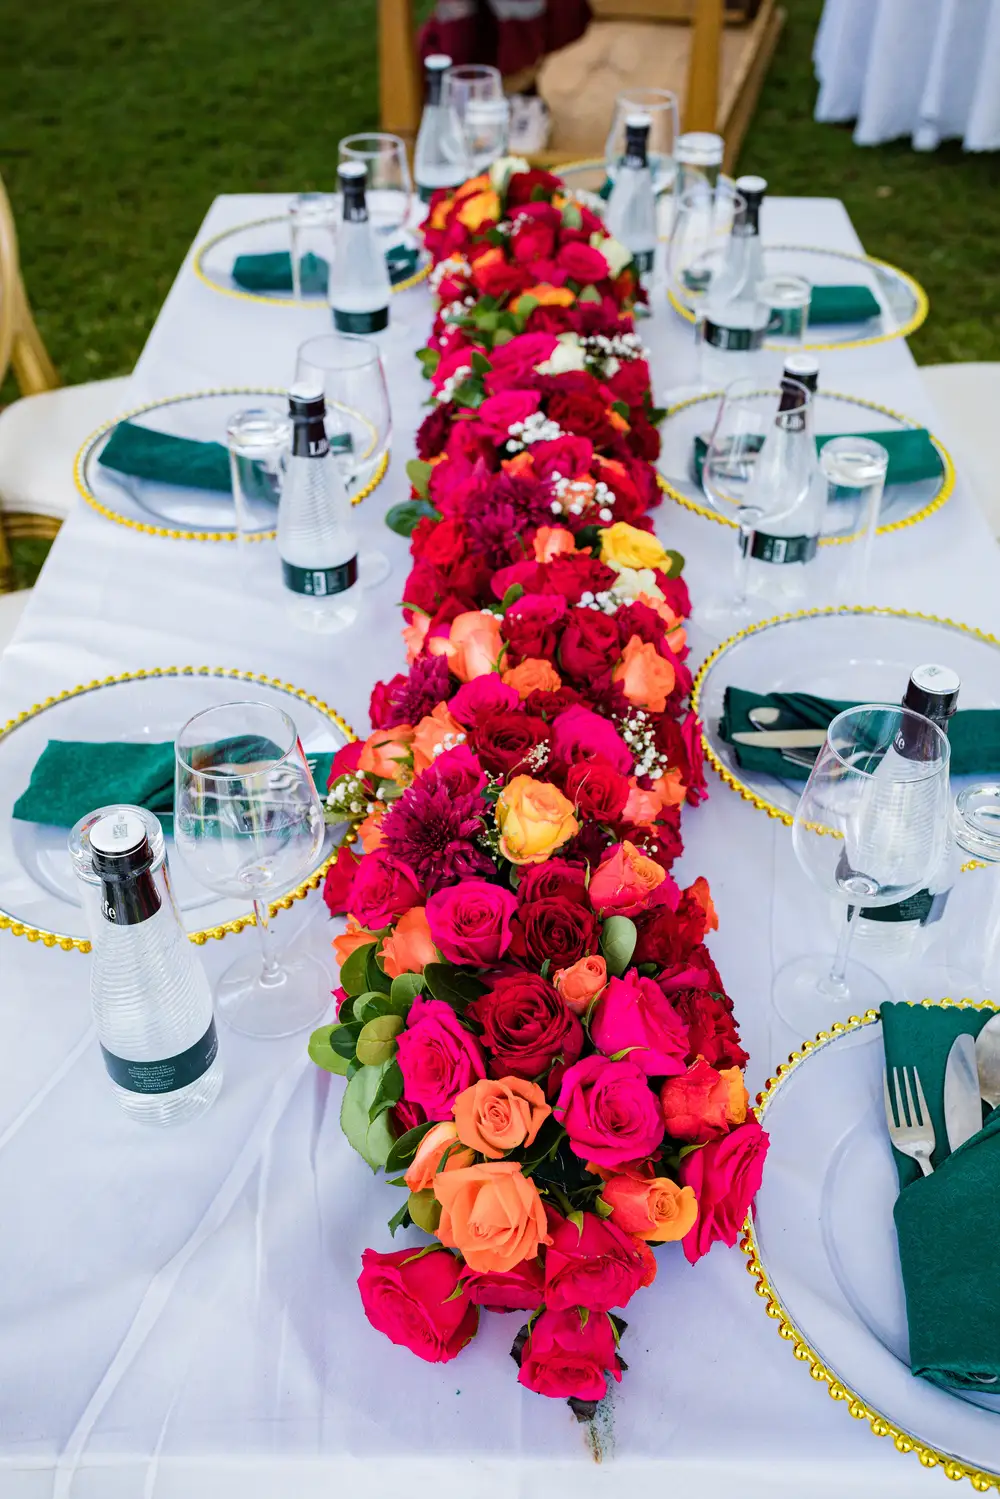 Flower Bouquet on a dinning table